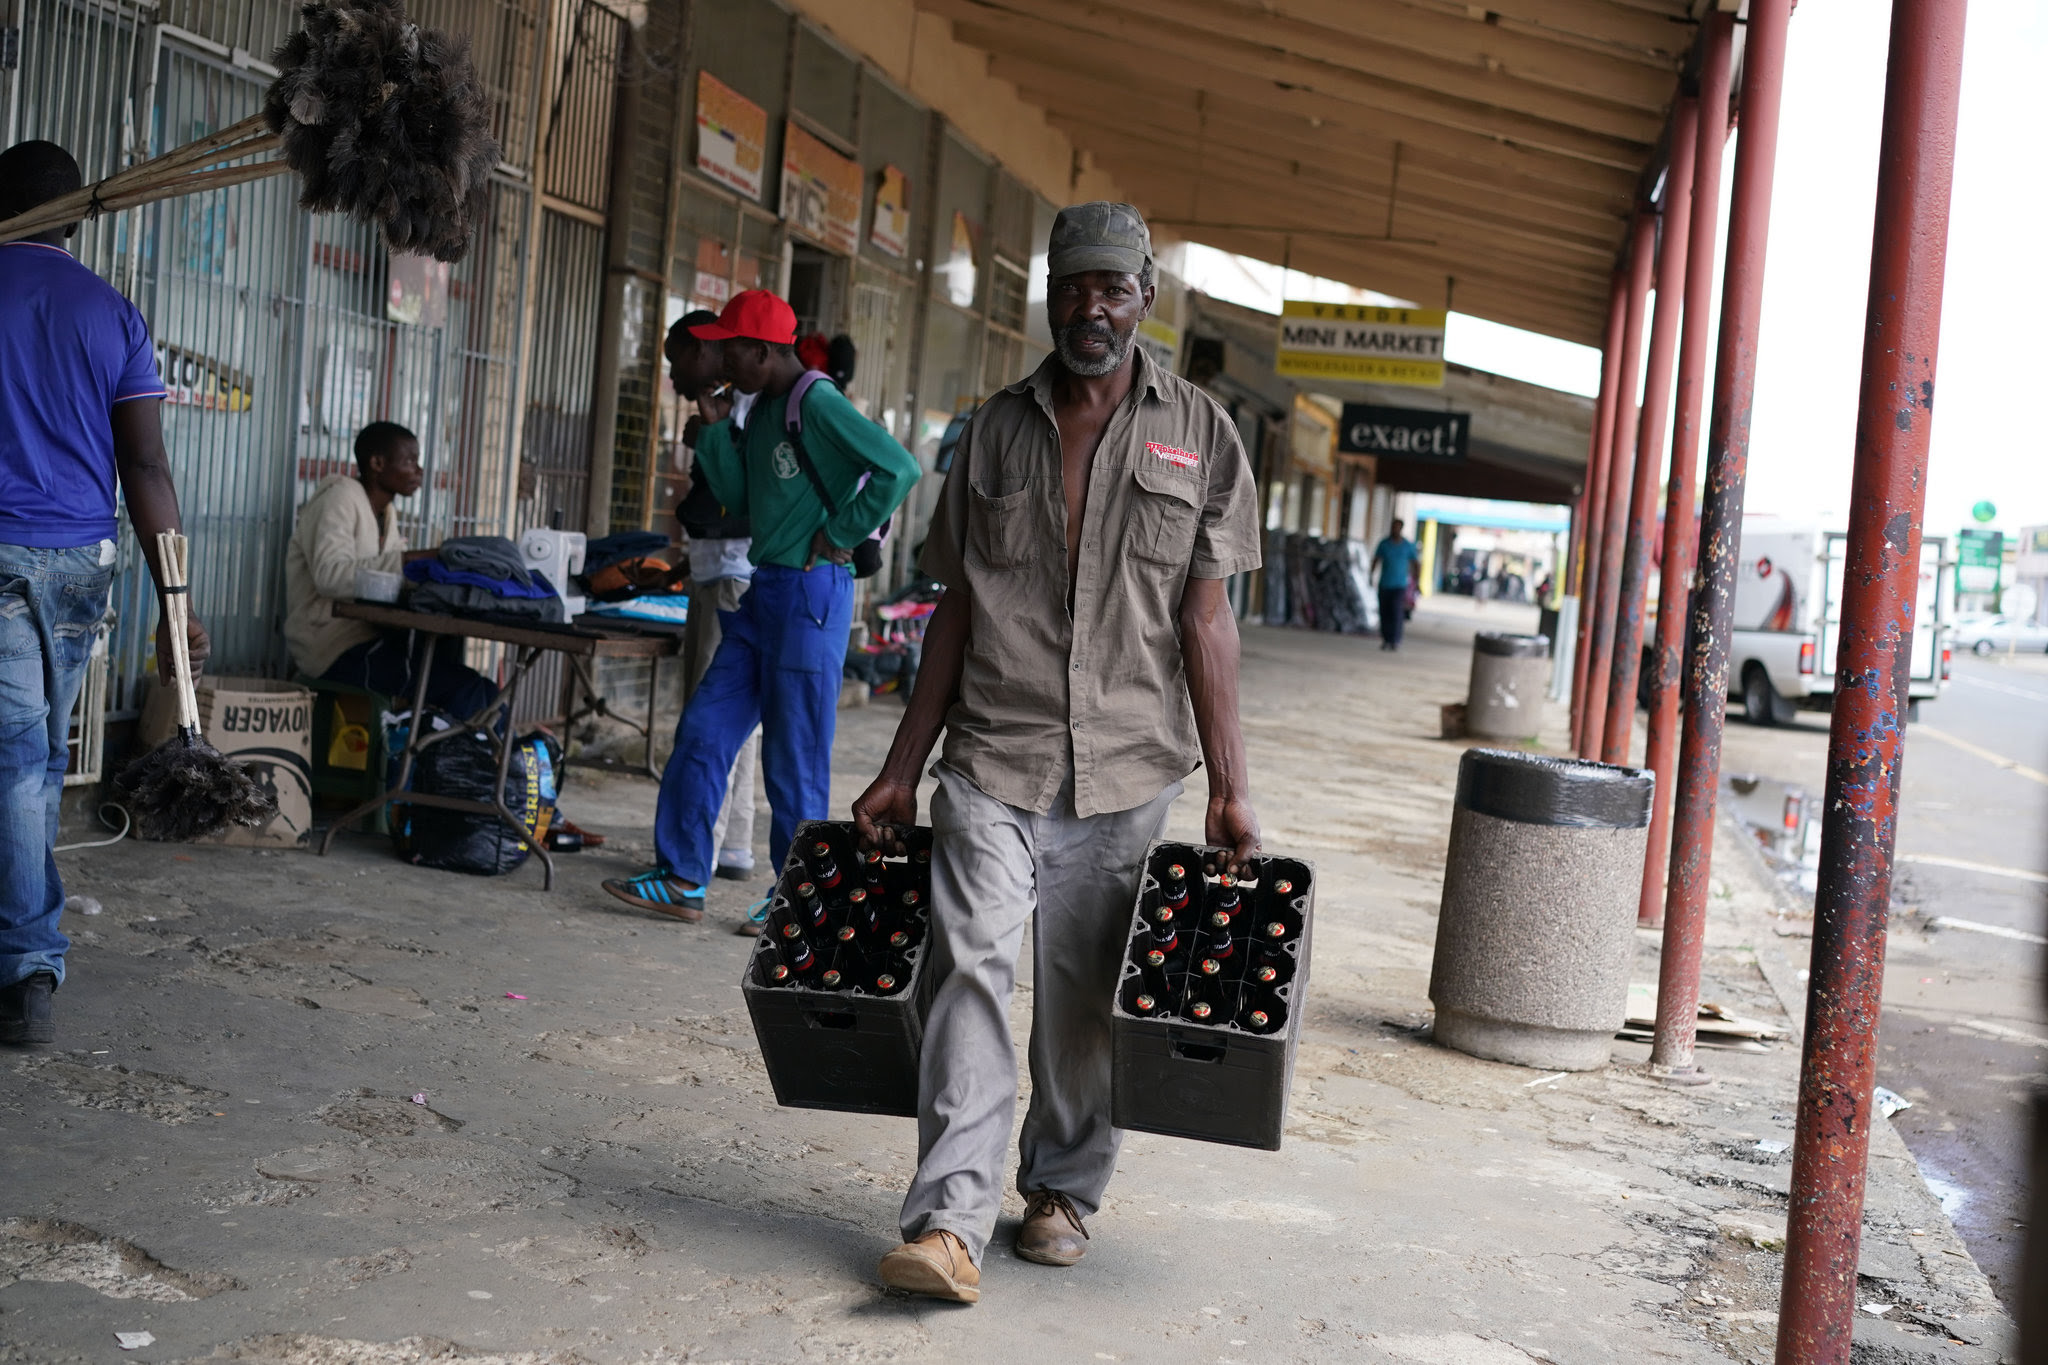 Vrede is a small farming town with discount chain stores, two supermarkets and a gas station. There is only one store in town operated by black South Africans. Credit Joao Silva/The New York Times 